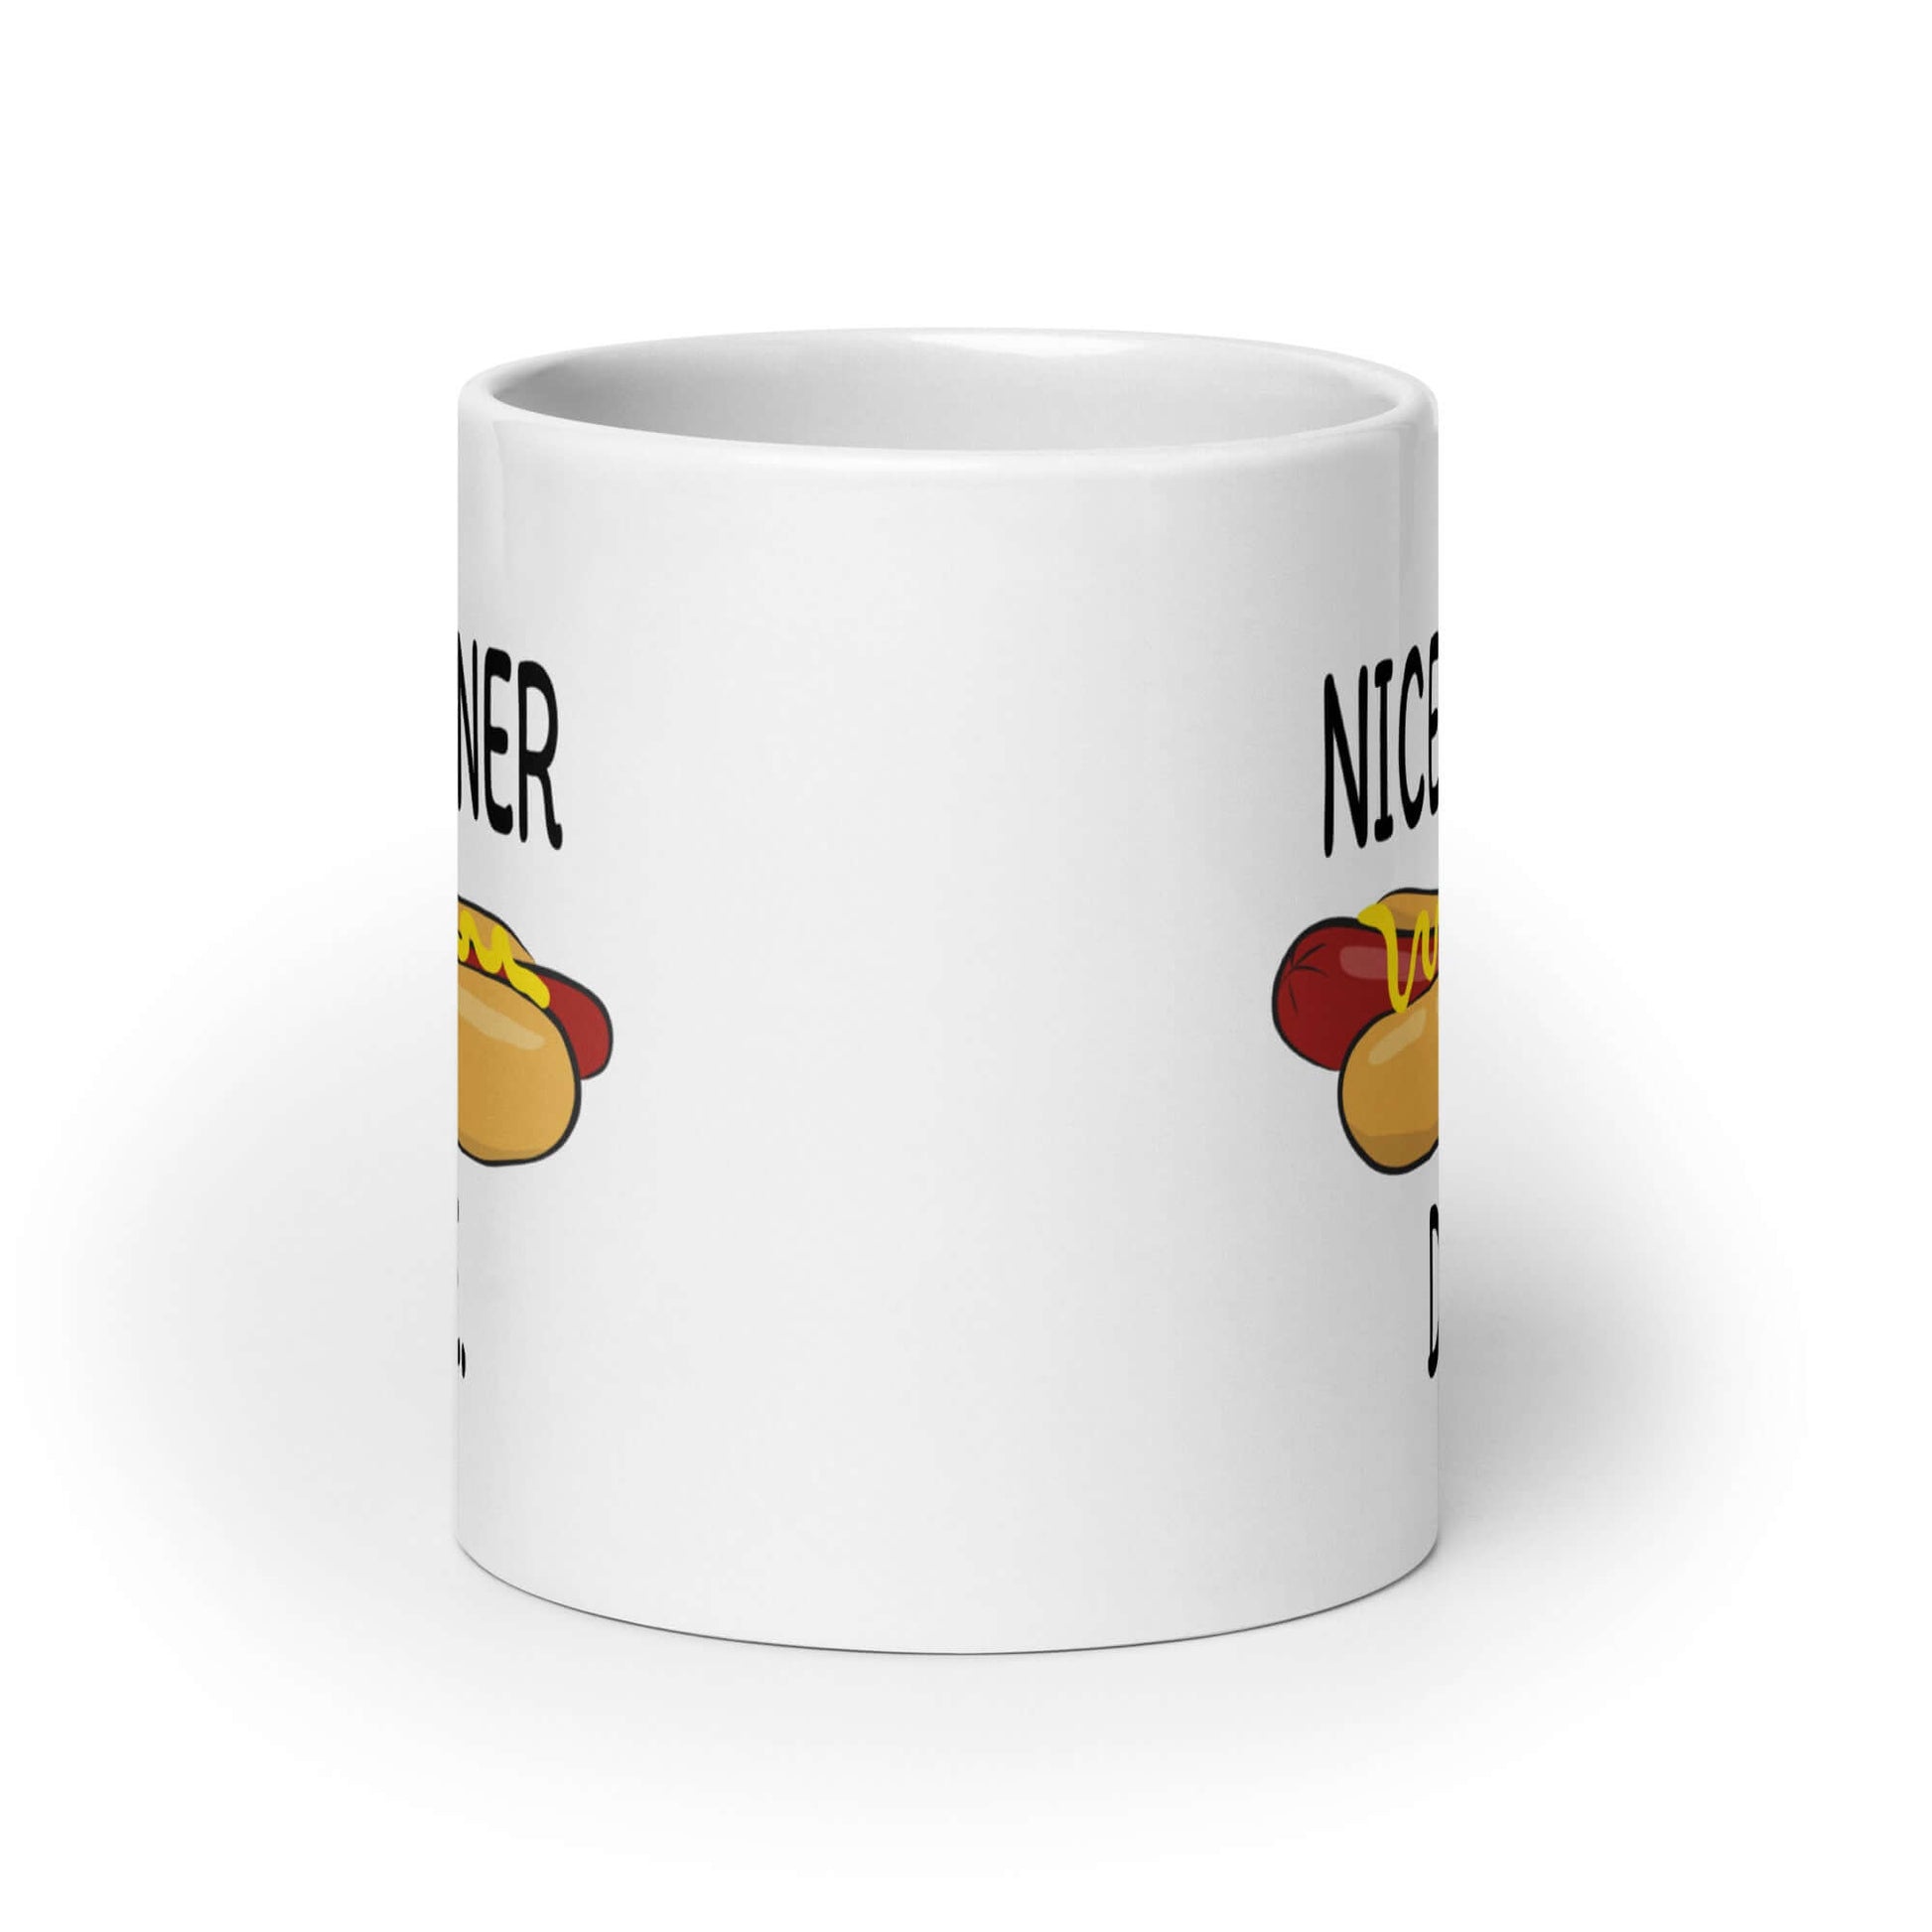 White ceramic mug with with an image of a hotdog and the phrase Nice wiener dude printed on both sides of the mug.